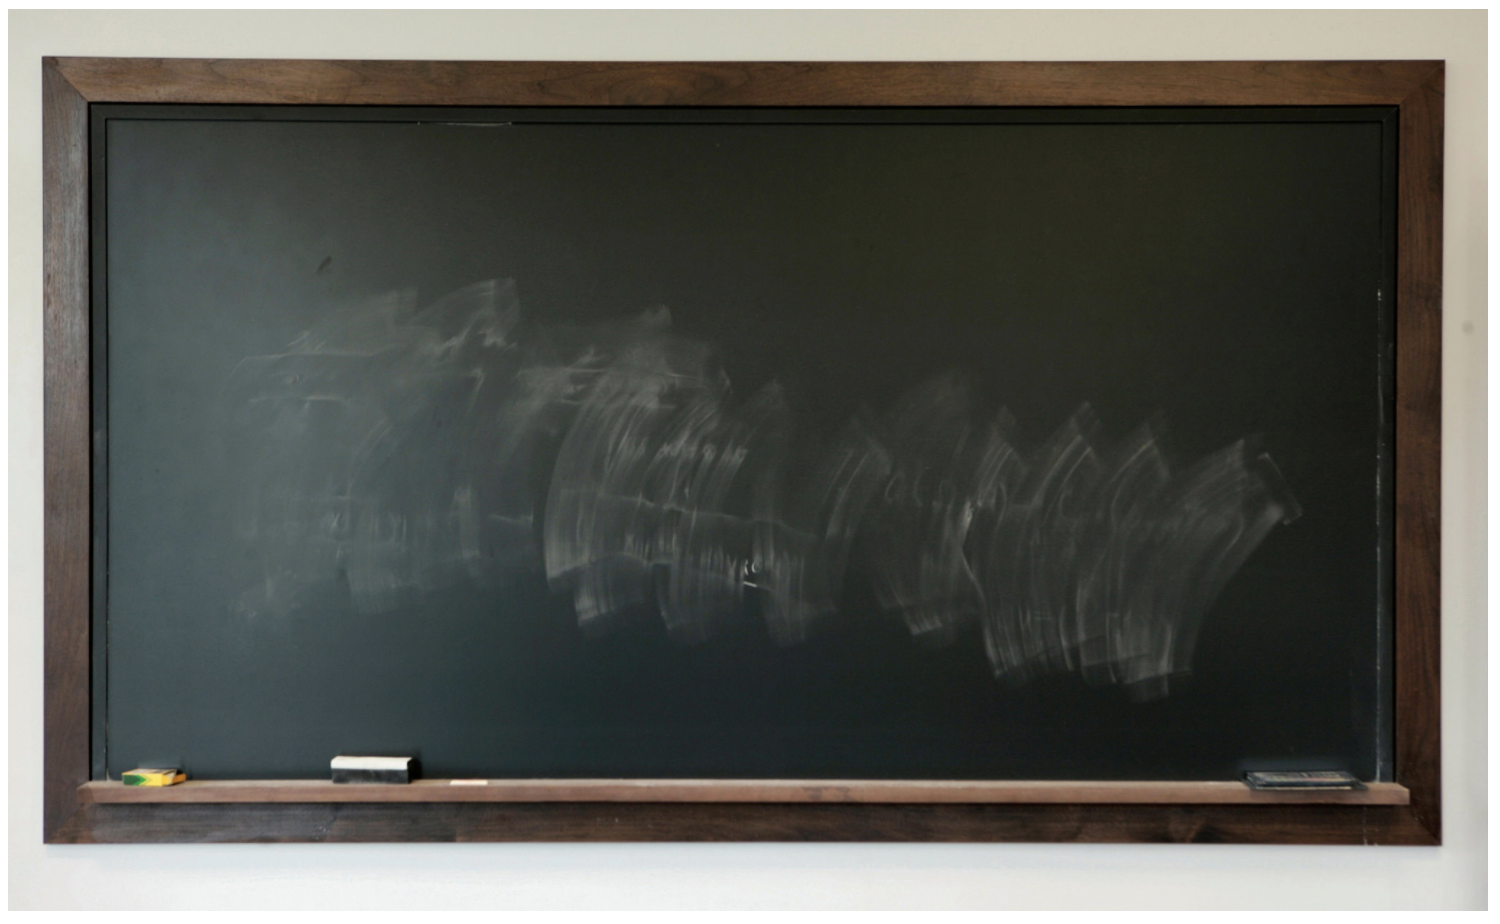 The timeless beauty of a mathematician's chalkboard